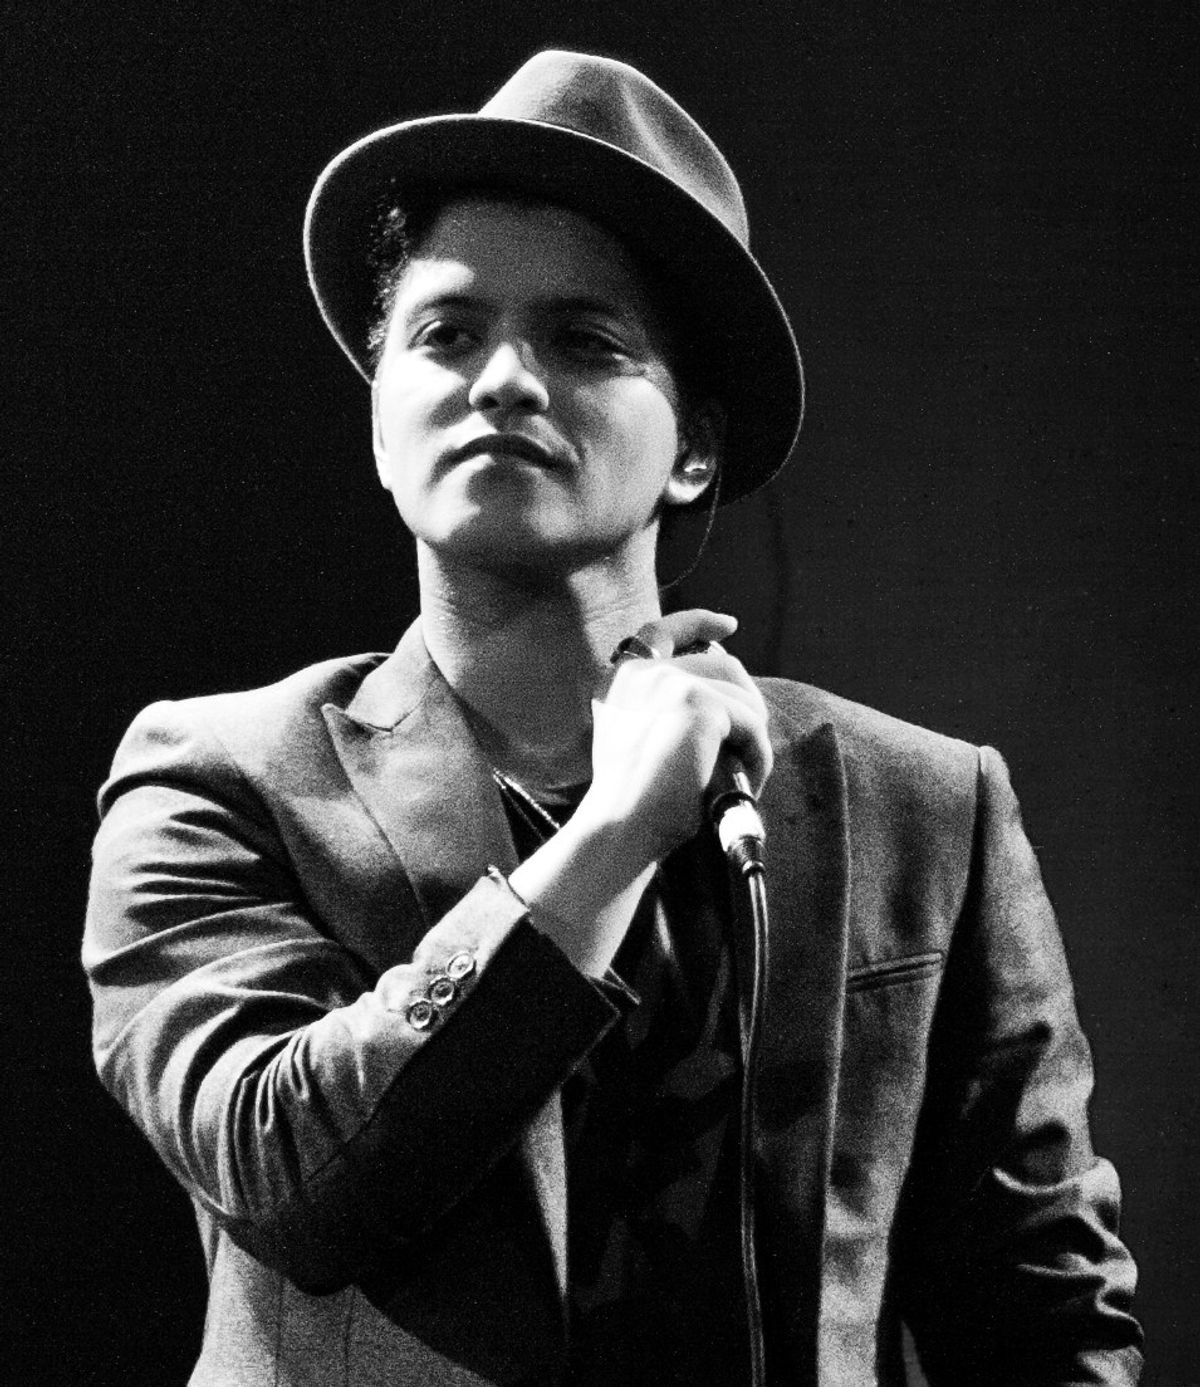 Bruno Mars' New Song Is More Sexual Than You Think